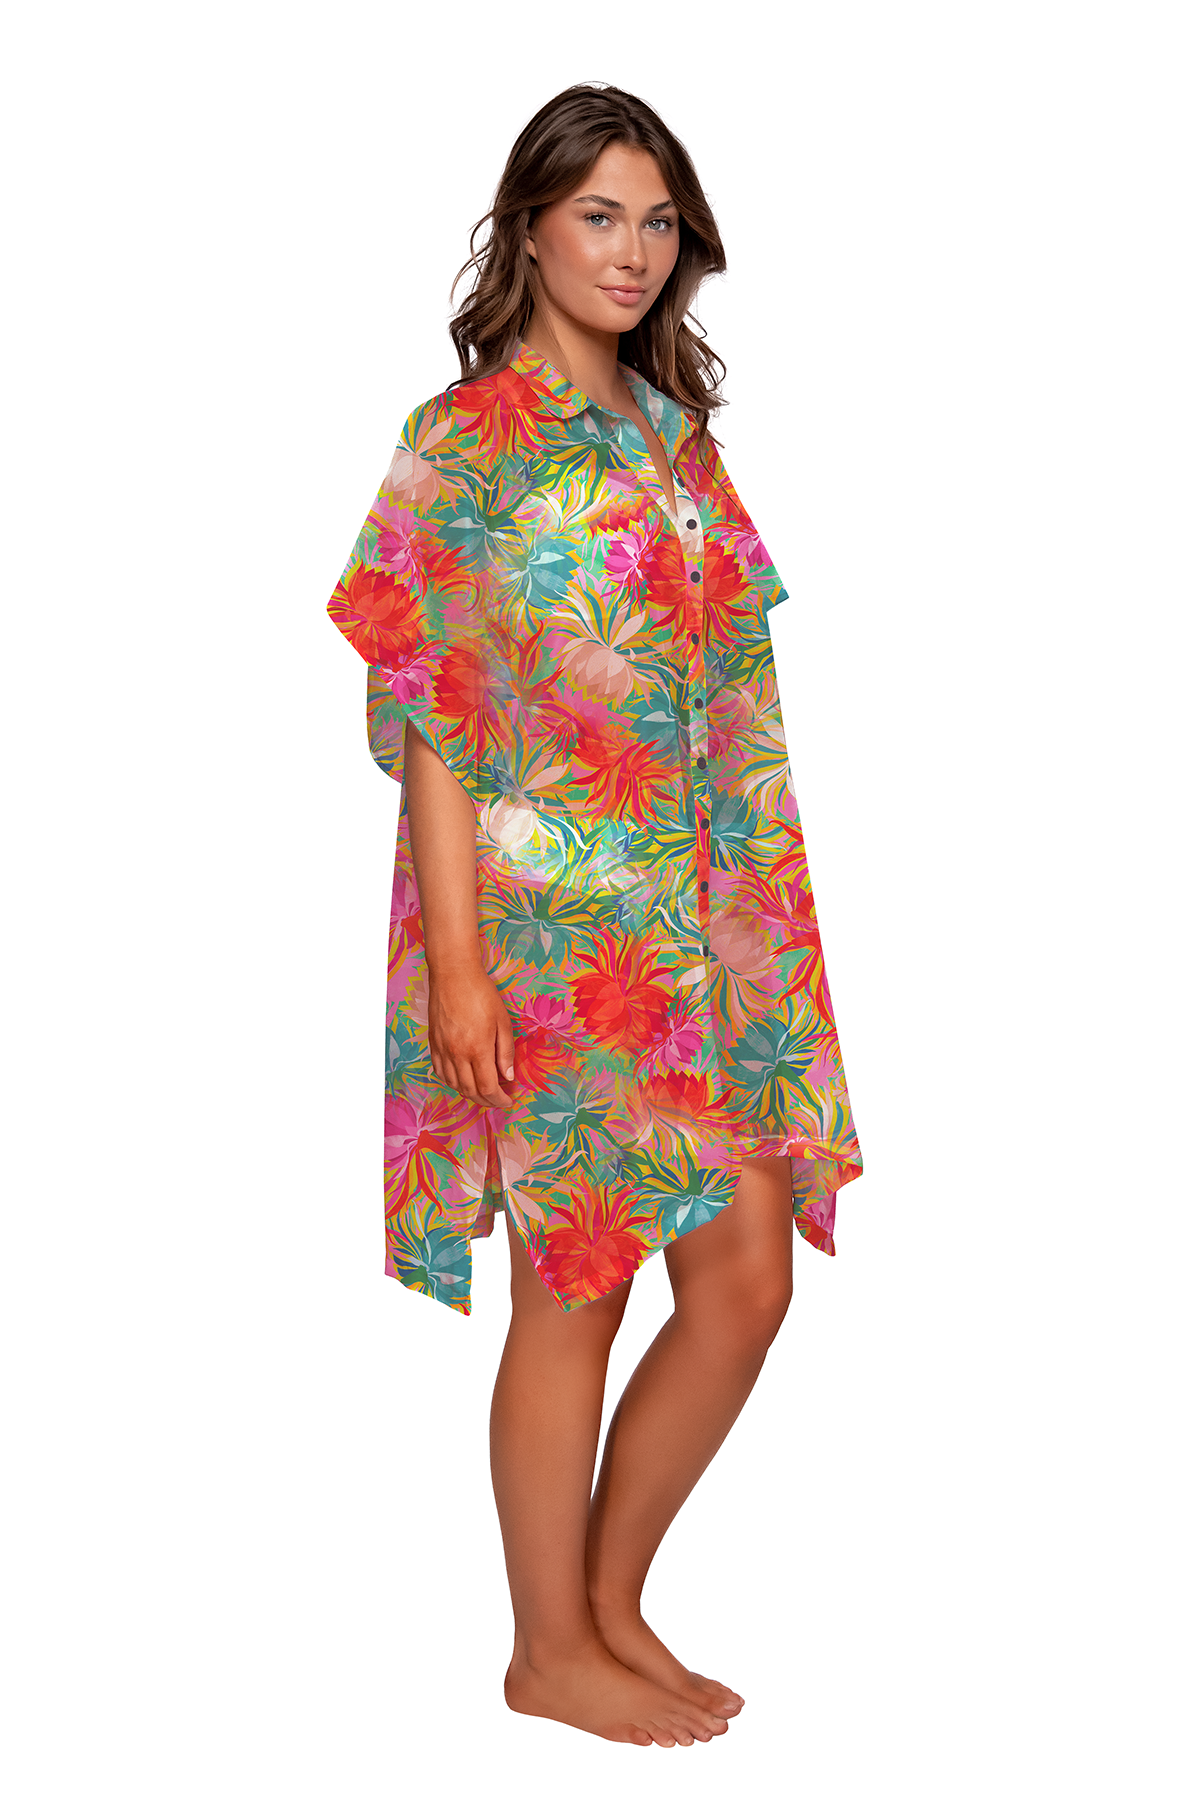 Side pose #1 of Taylor wearing Sunsets Lotus Shore Thing Tunic